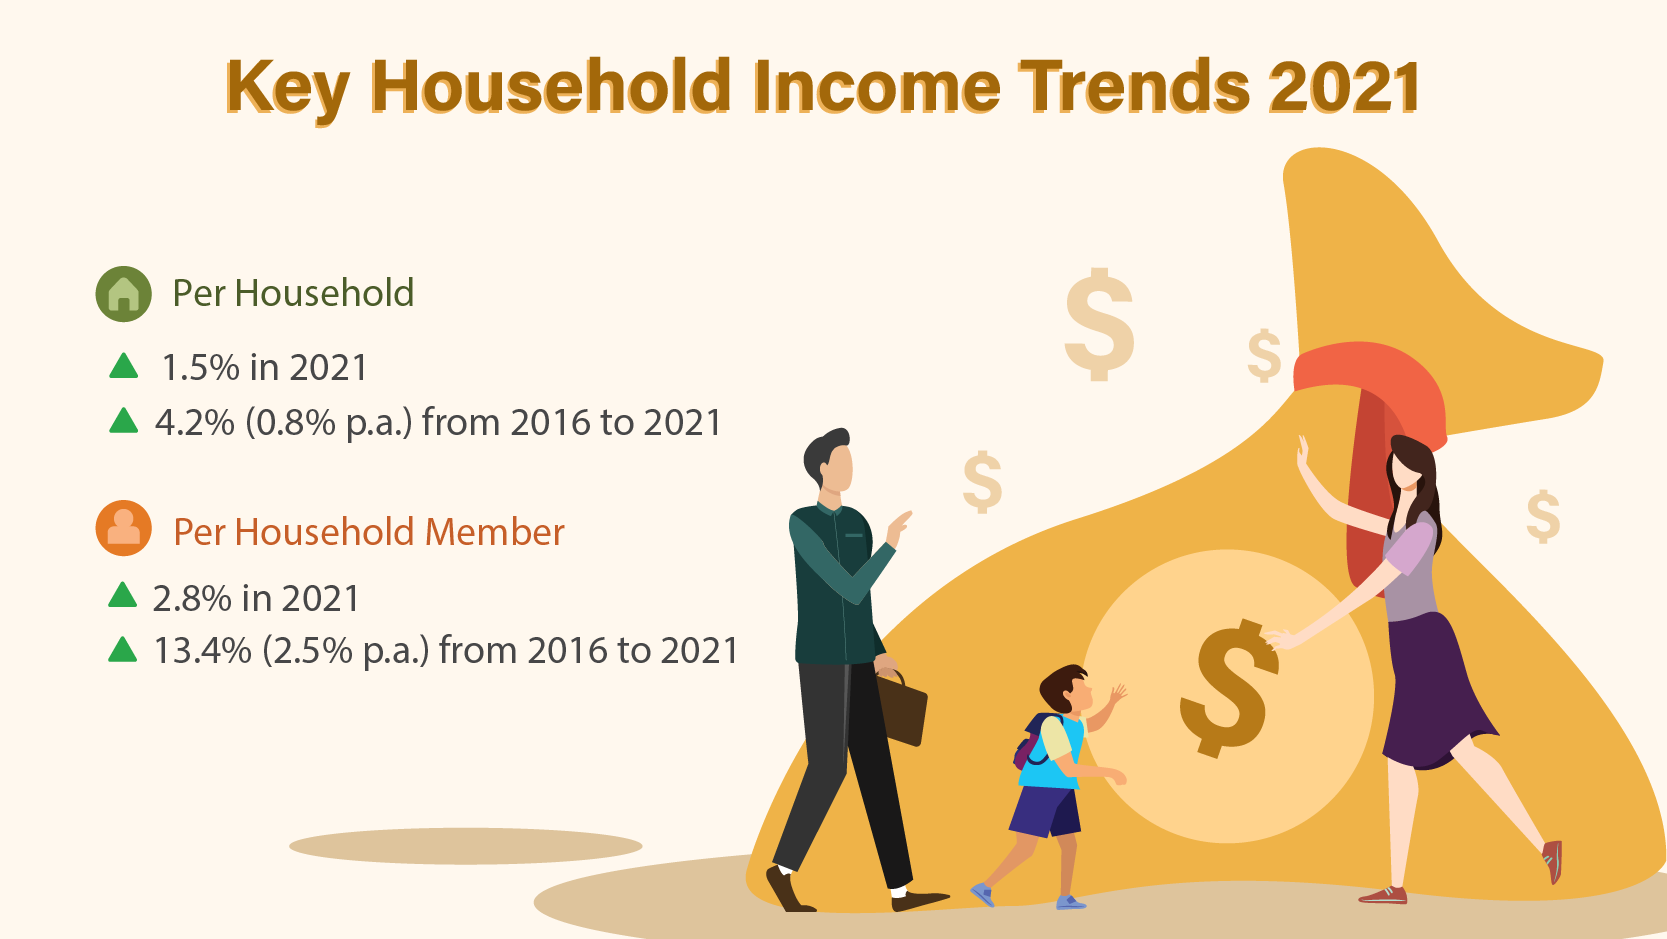 Key Household Income Trends, 2021